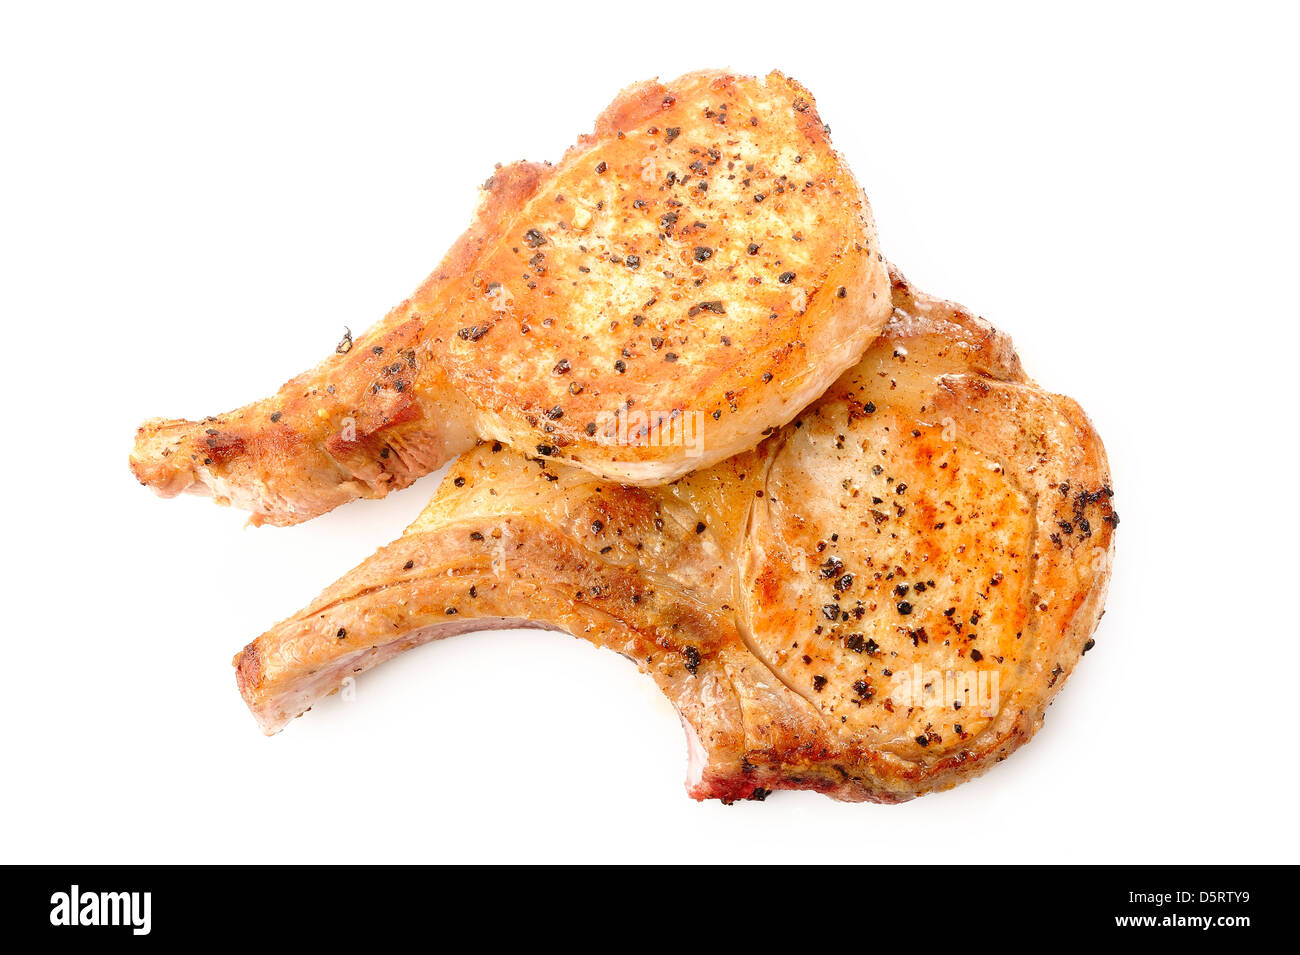 grilled pork chop with black pepper Stock Photo